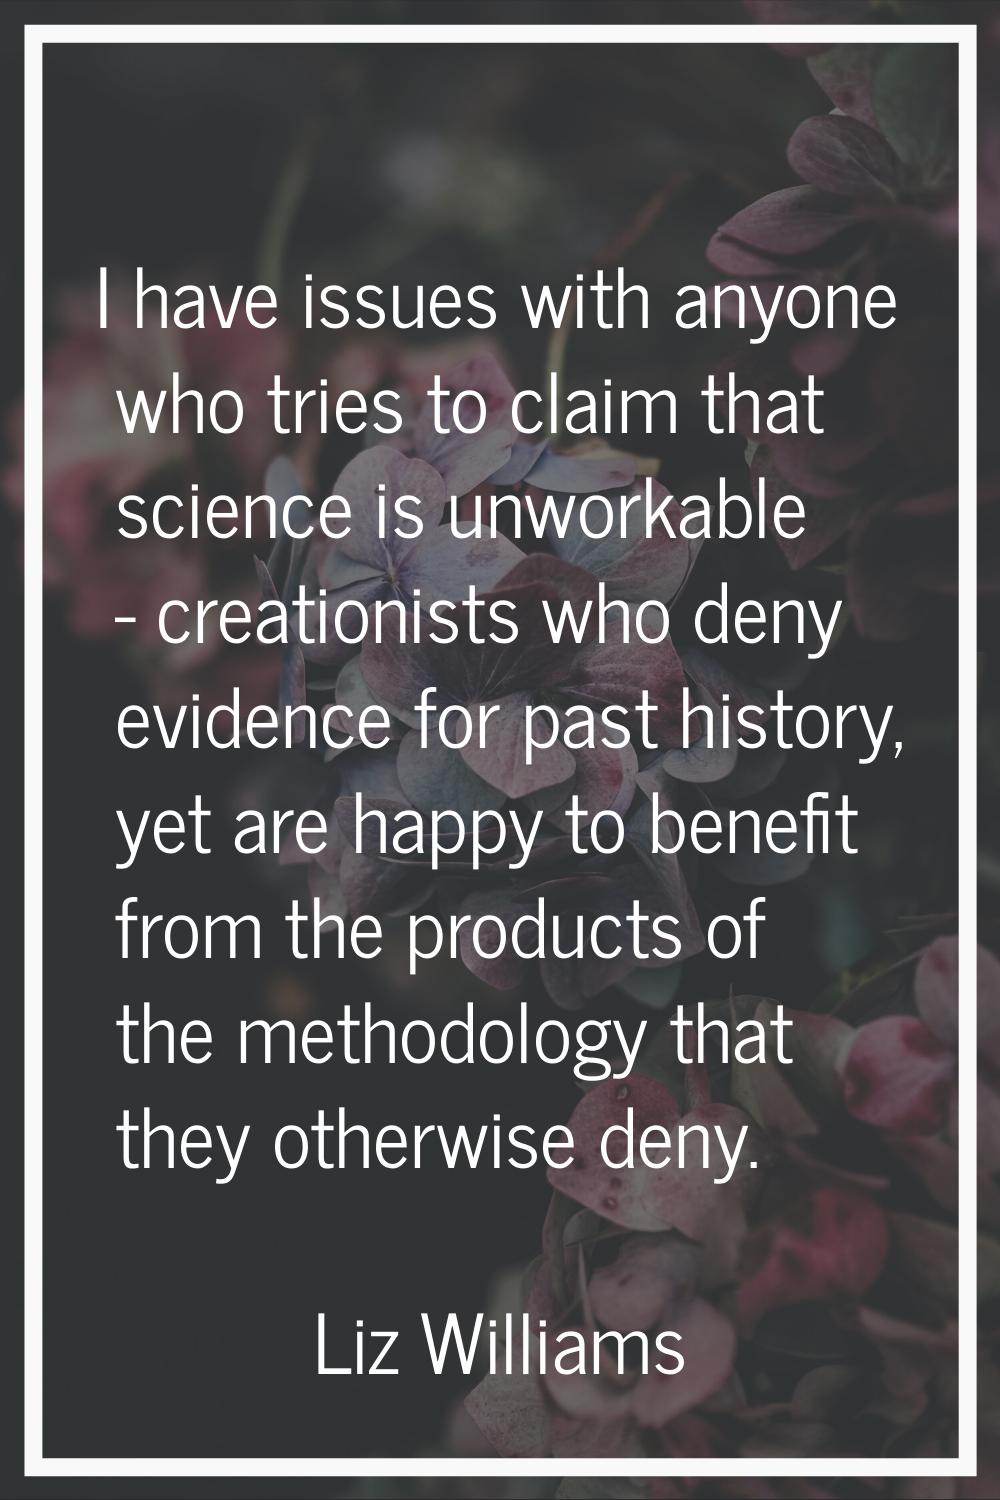 I have issues with anyone who tries to claim that science is unworkable - creationists who deny evi